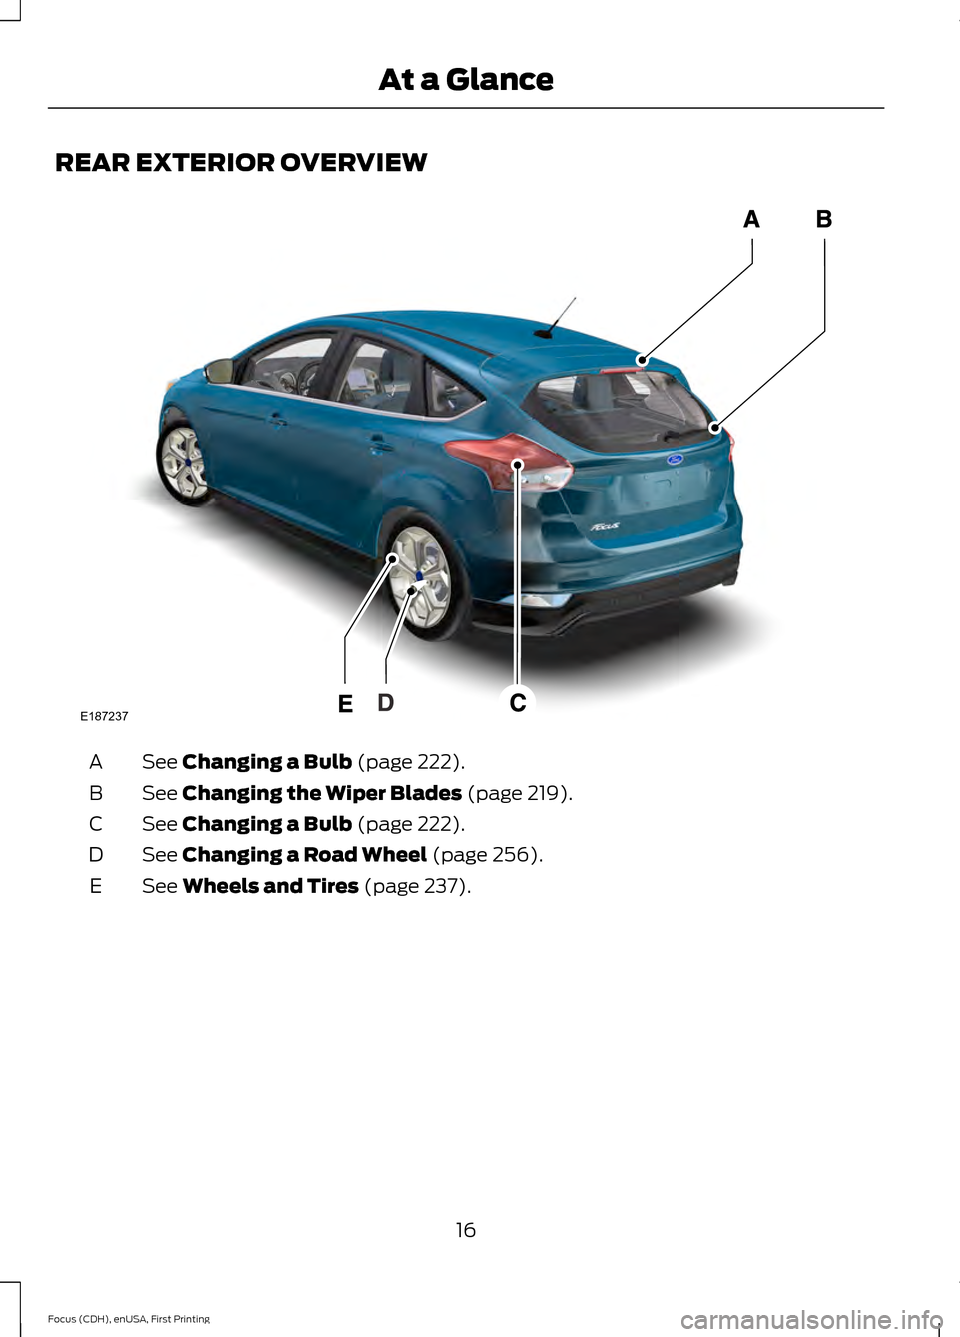 FORD FOCUS 2015 3.G Owners Manual REAR EXTERIOR OVERVIEW
See Changing a Bulb (page 222).
A
See 
Changing the Wiper Blades (page 219).
B
See 
Changing a Bulb (page 222).
C
See 
Changing a Road Wheel (page 256).
D
See 
Wheels and Tires 